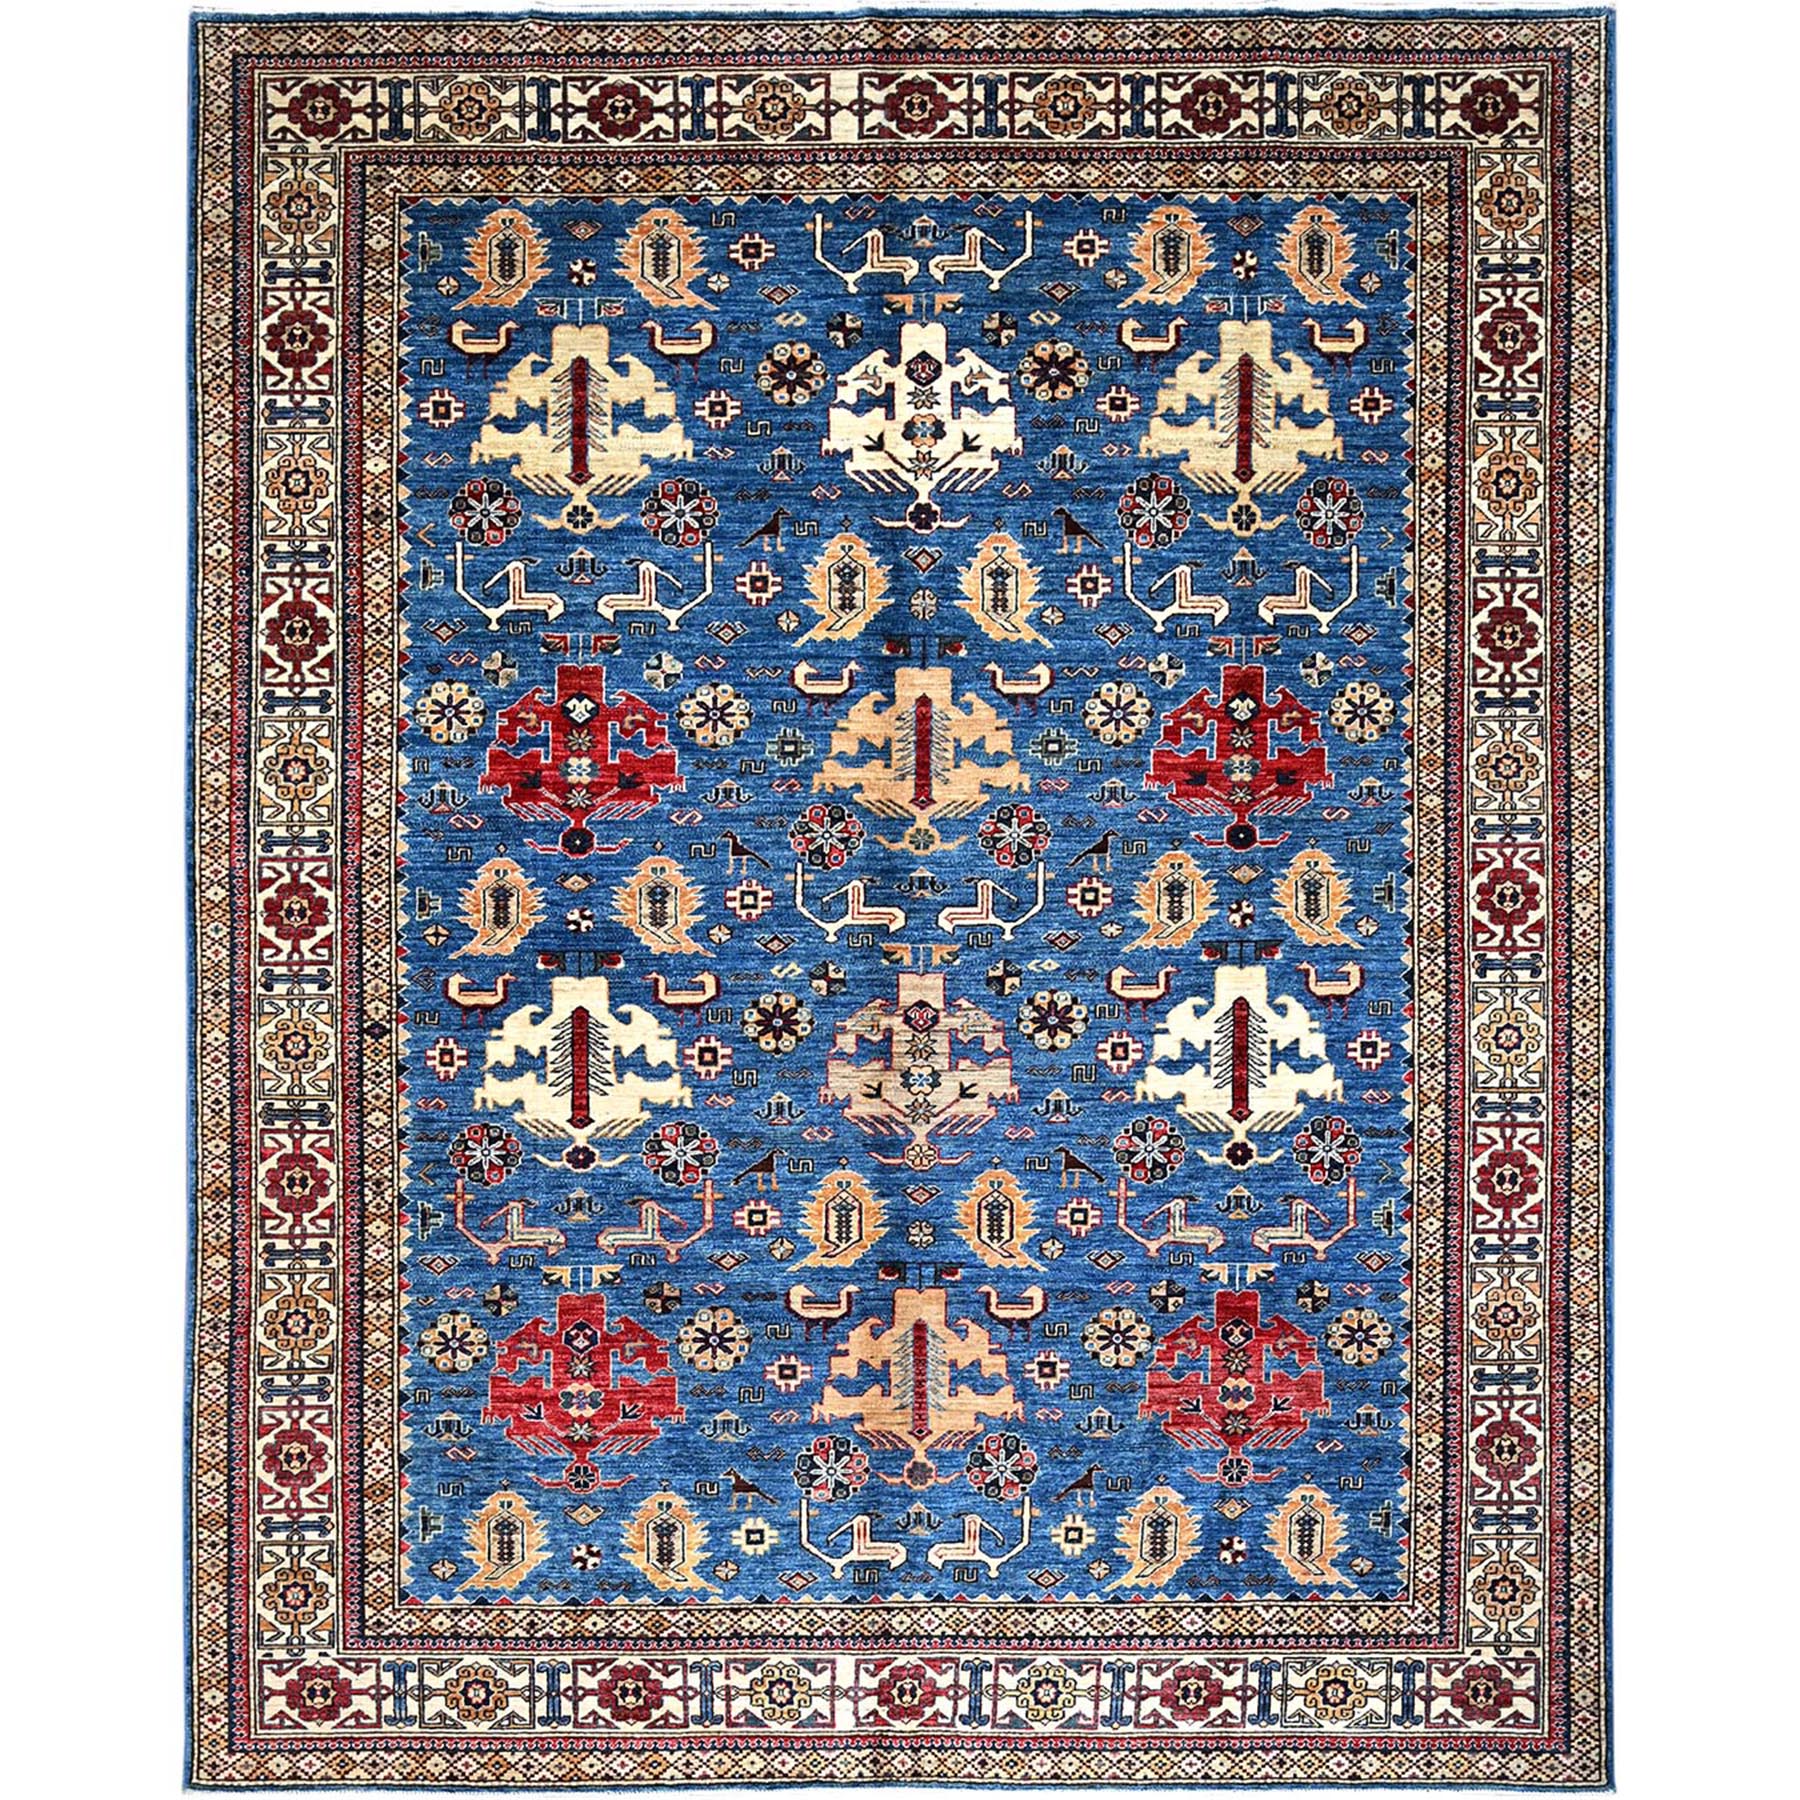 Fjord Blue and Tallow White, Soft and Shiny Wool, Hand Knotted Afghan Super Kazak with Tribal Medallions Design, Vegetable Dyes, Oriental Rug